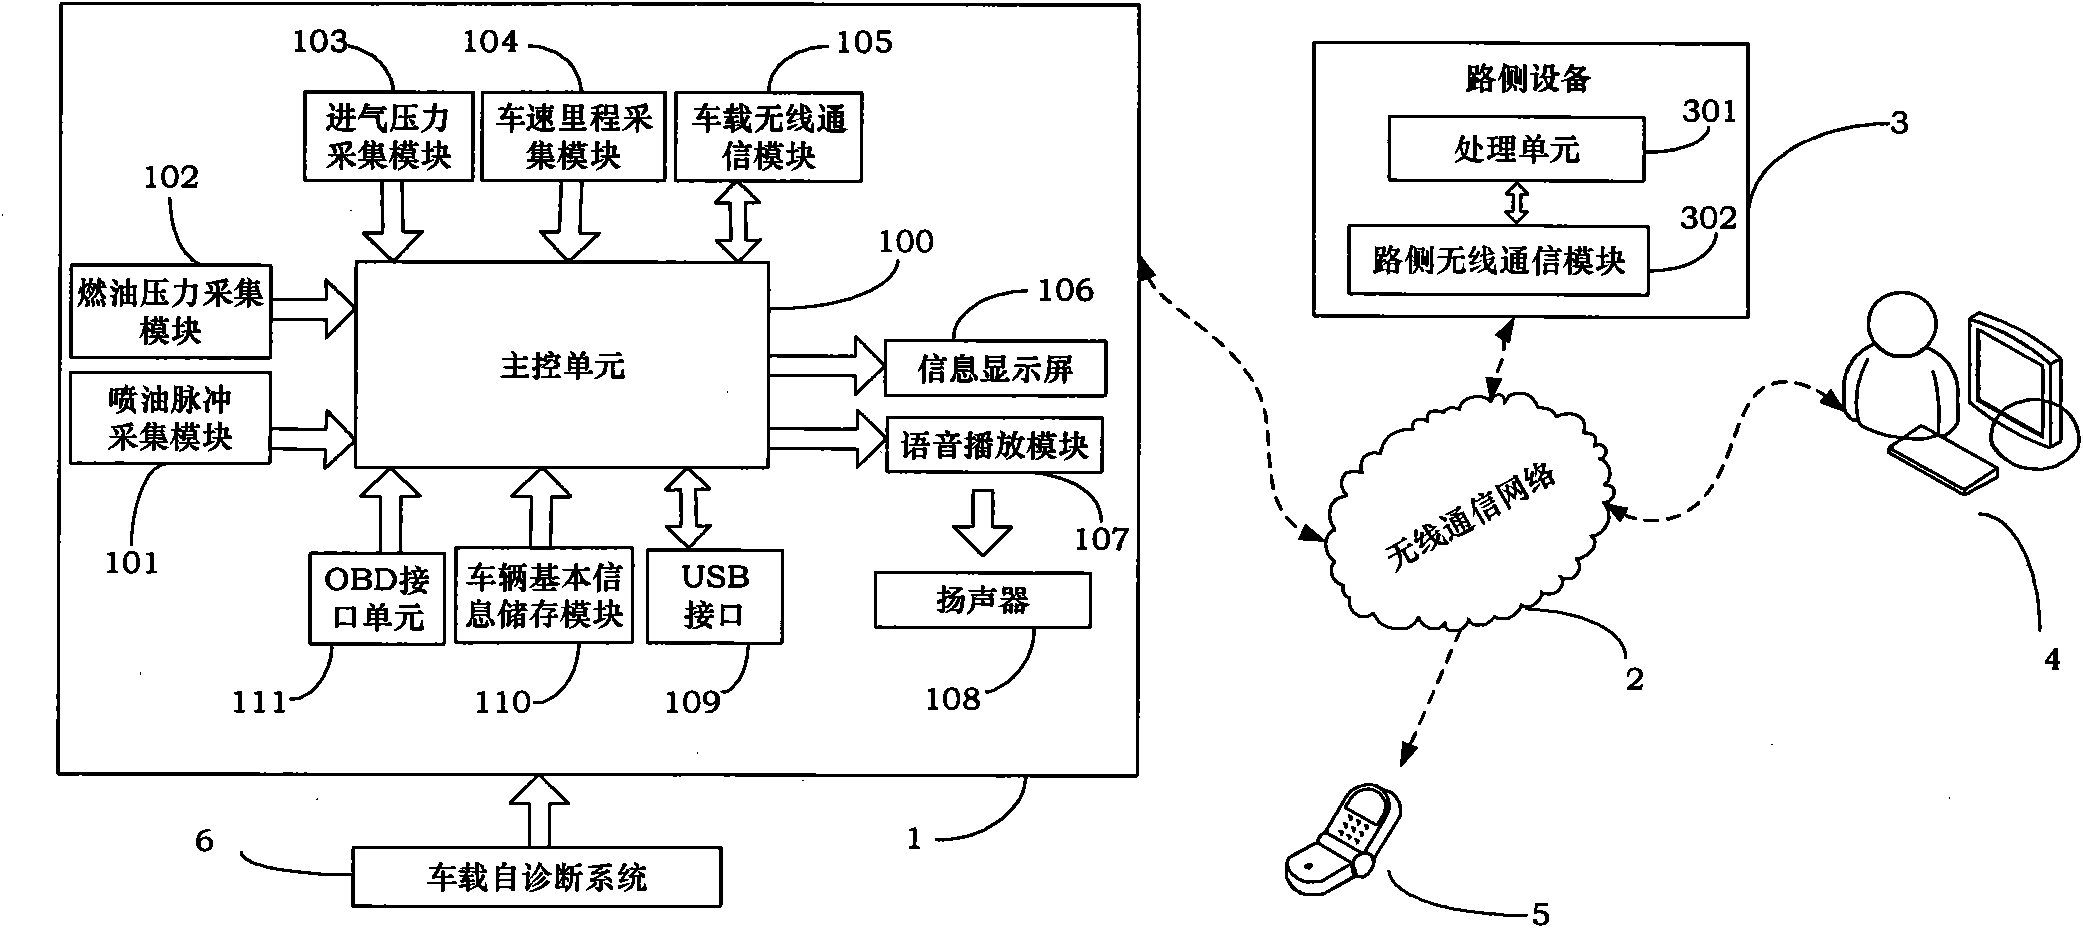 System for measuring and monitoring fuel consumption of automobile in use in real time and measurement and monitoring method thereof